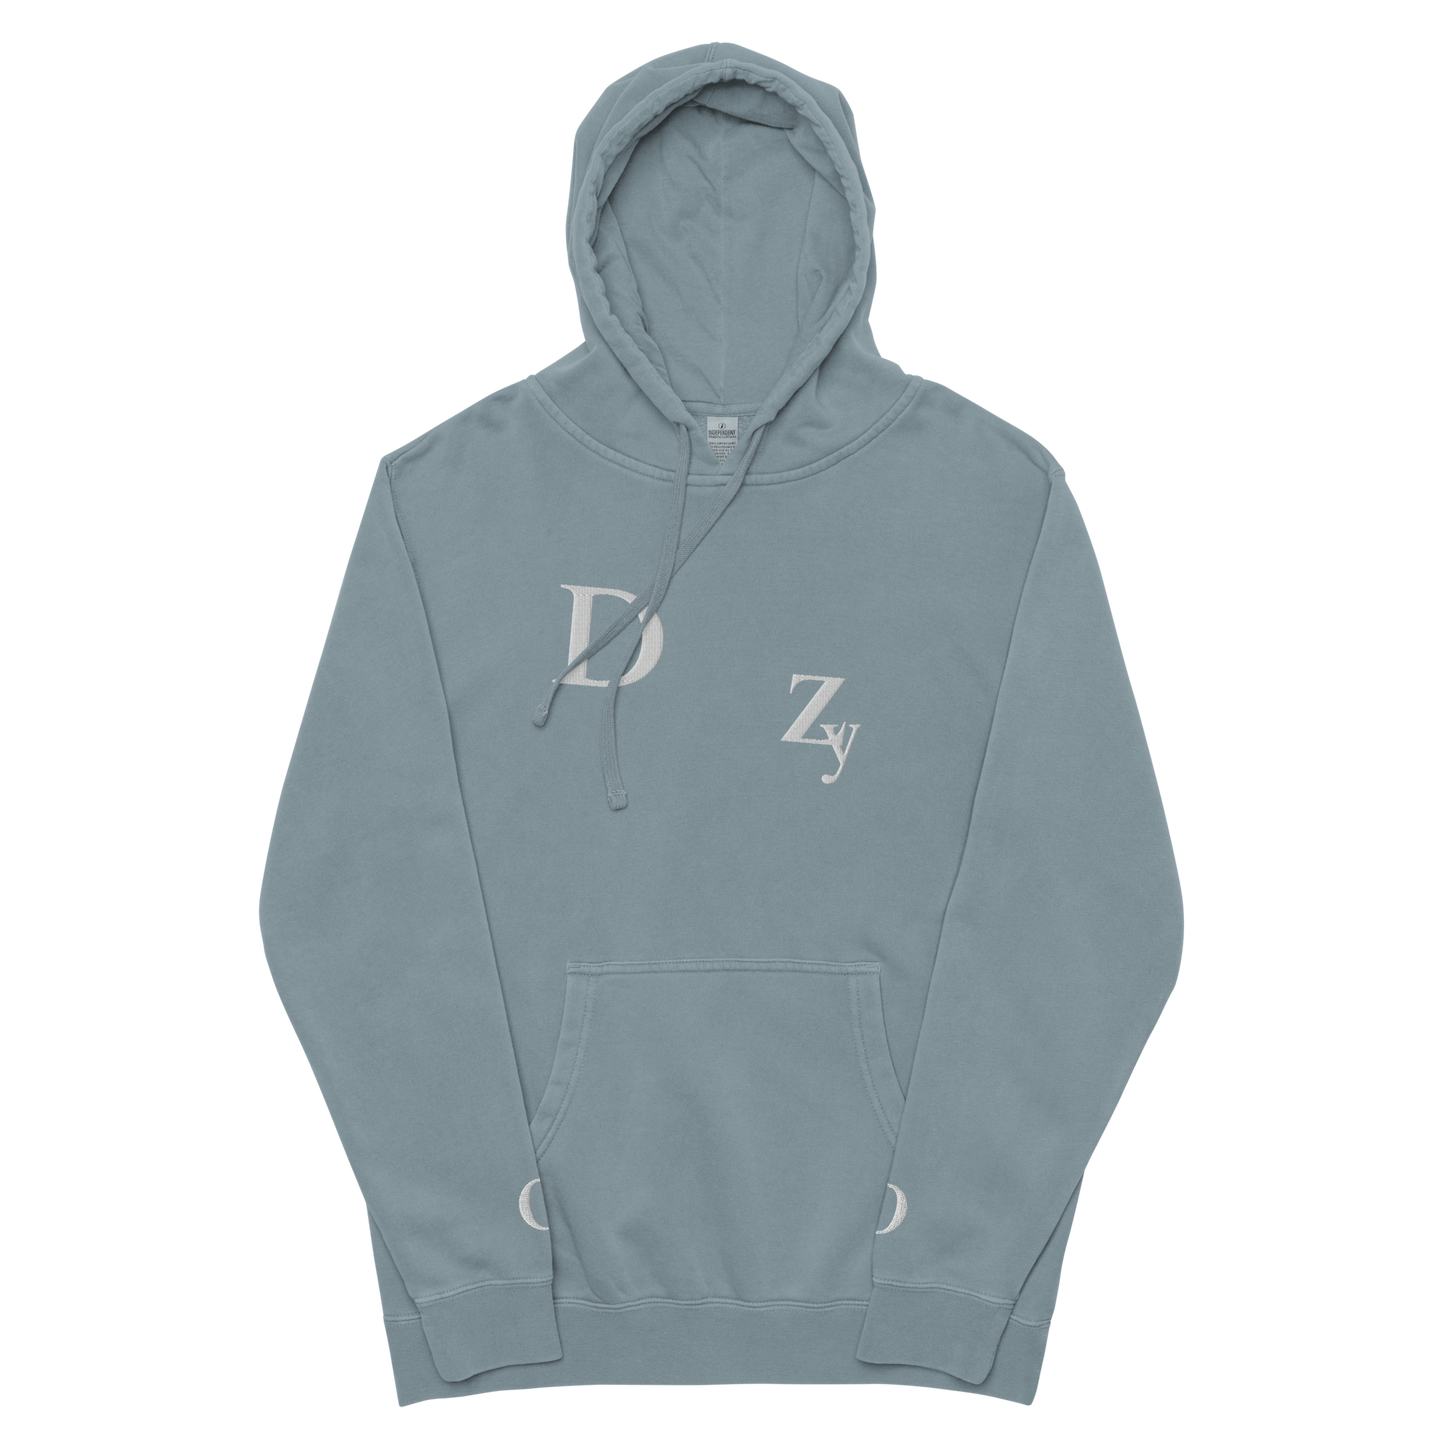 DZY Unisex pigment-dyed hoodie